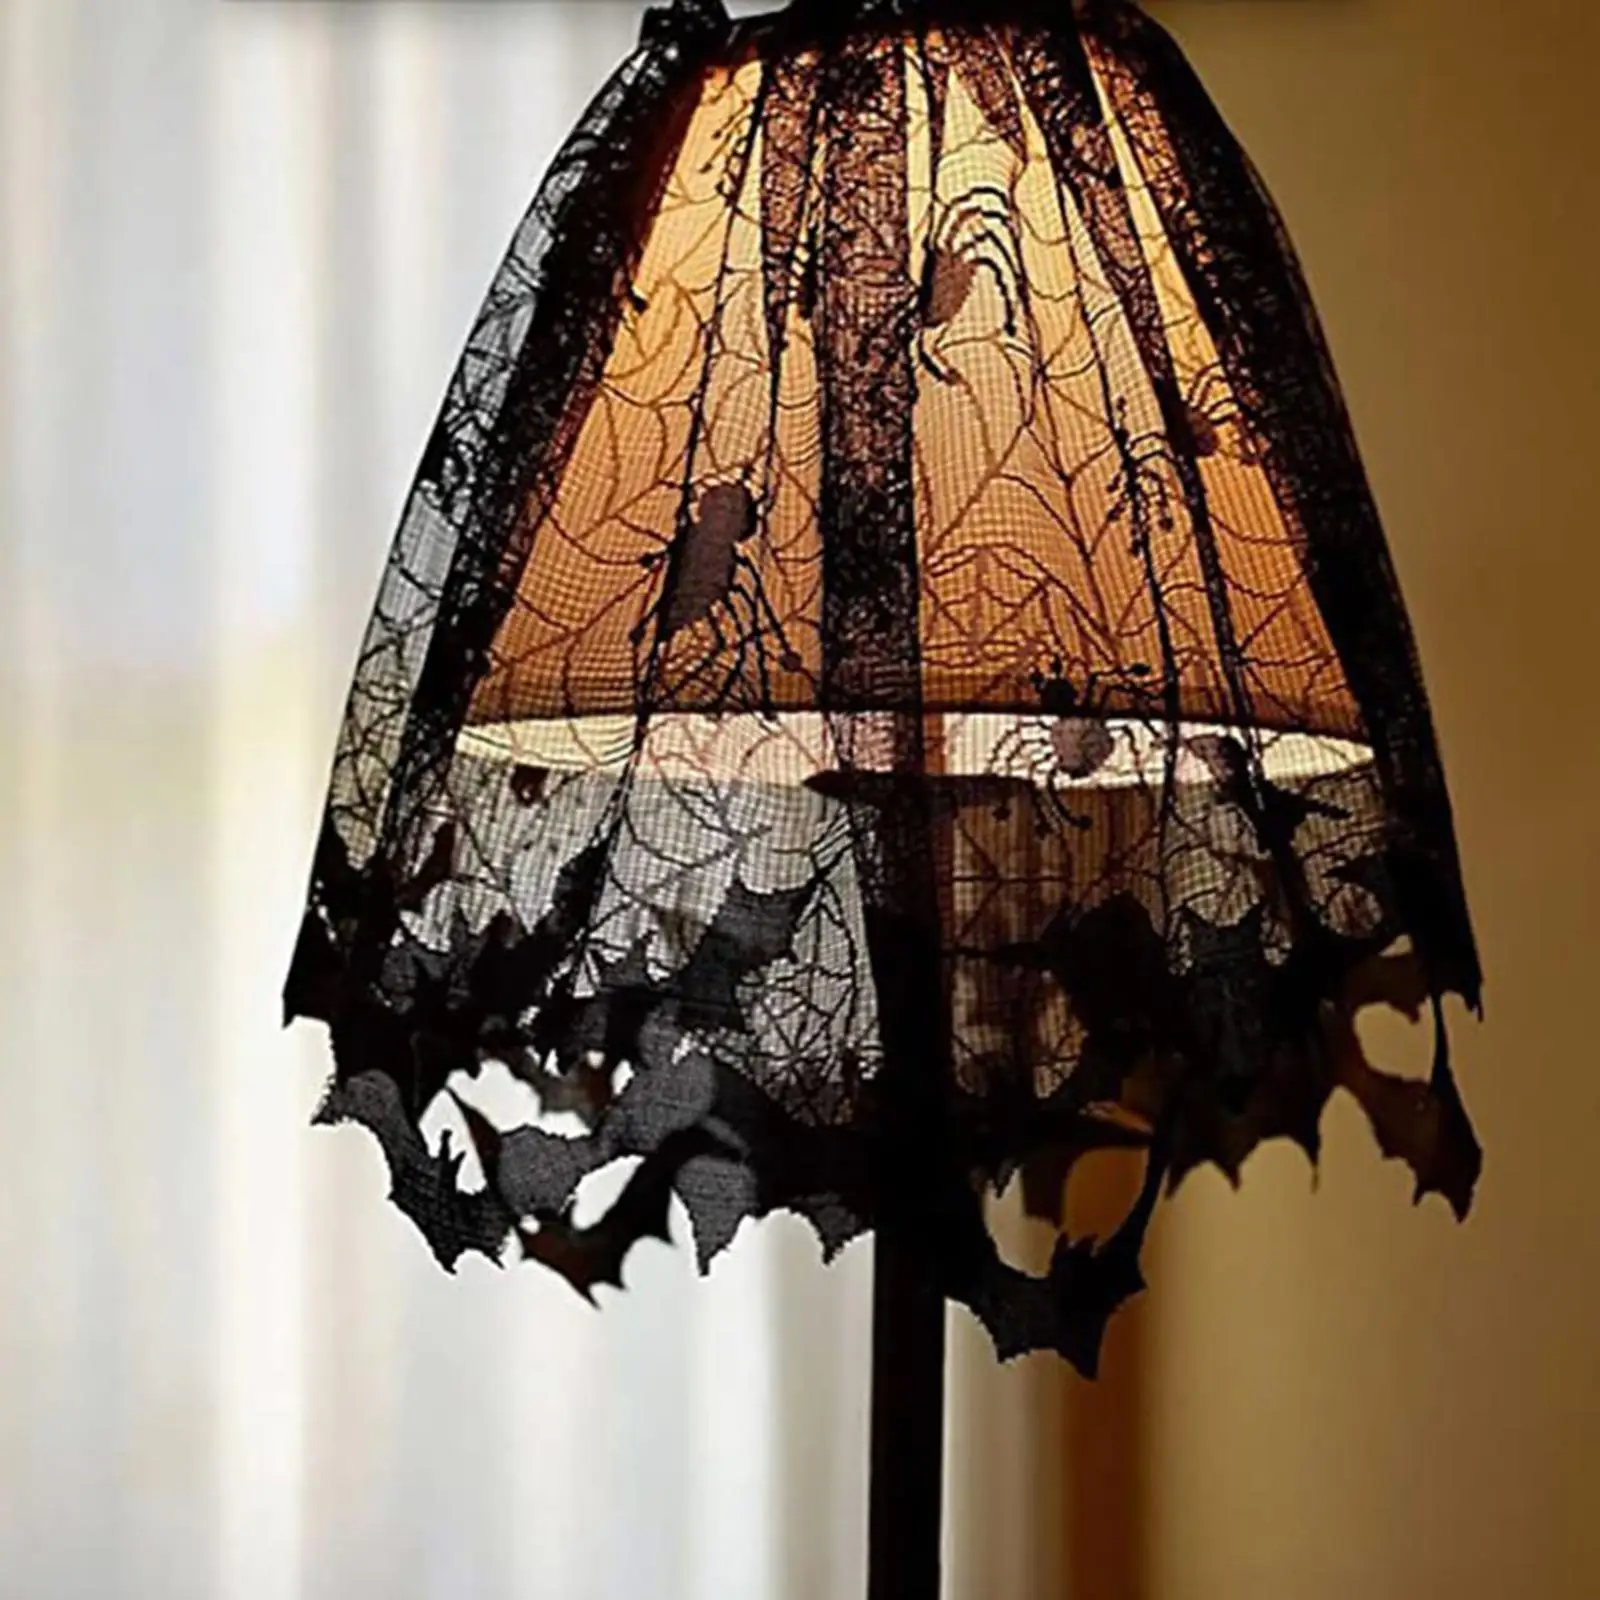 Lampshades Cover Cover Shade Topper Scarf Bat Halloween Lamp Shade for Halloween Wall Decoration Cafe Festive